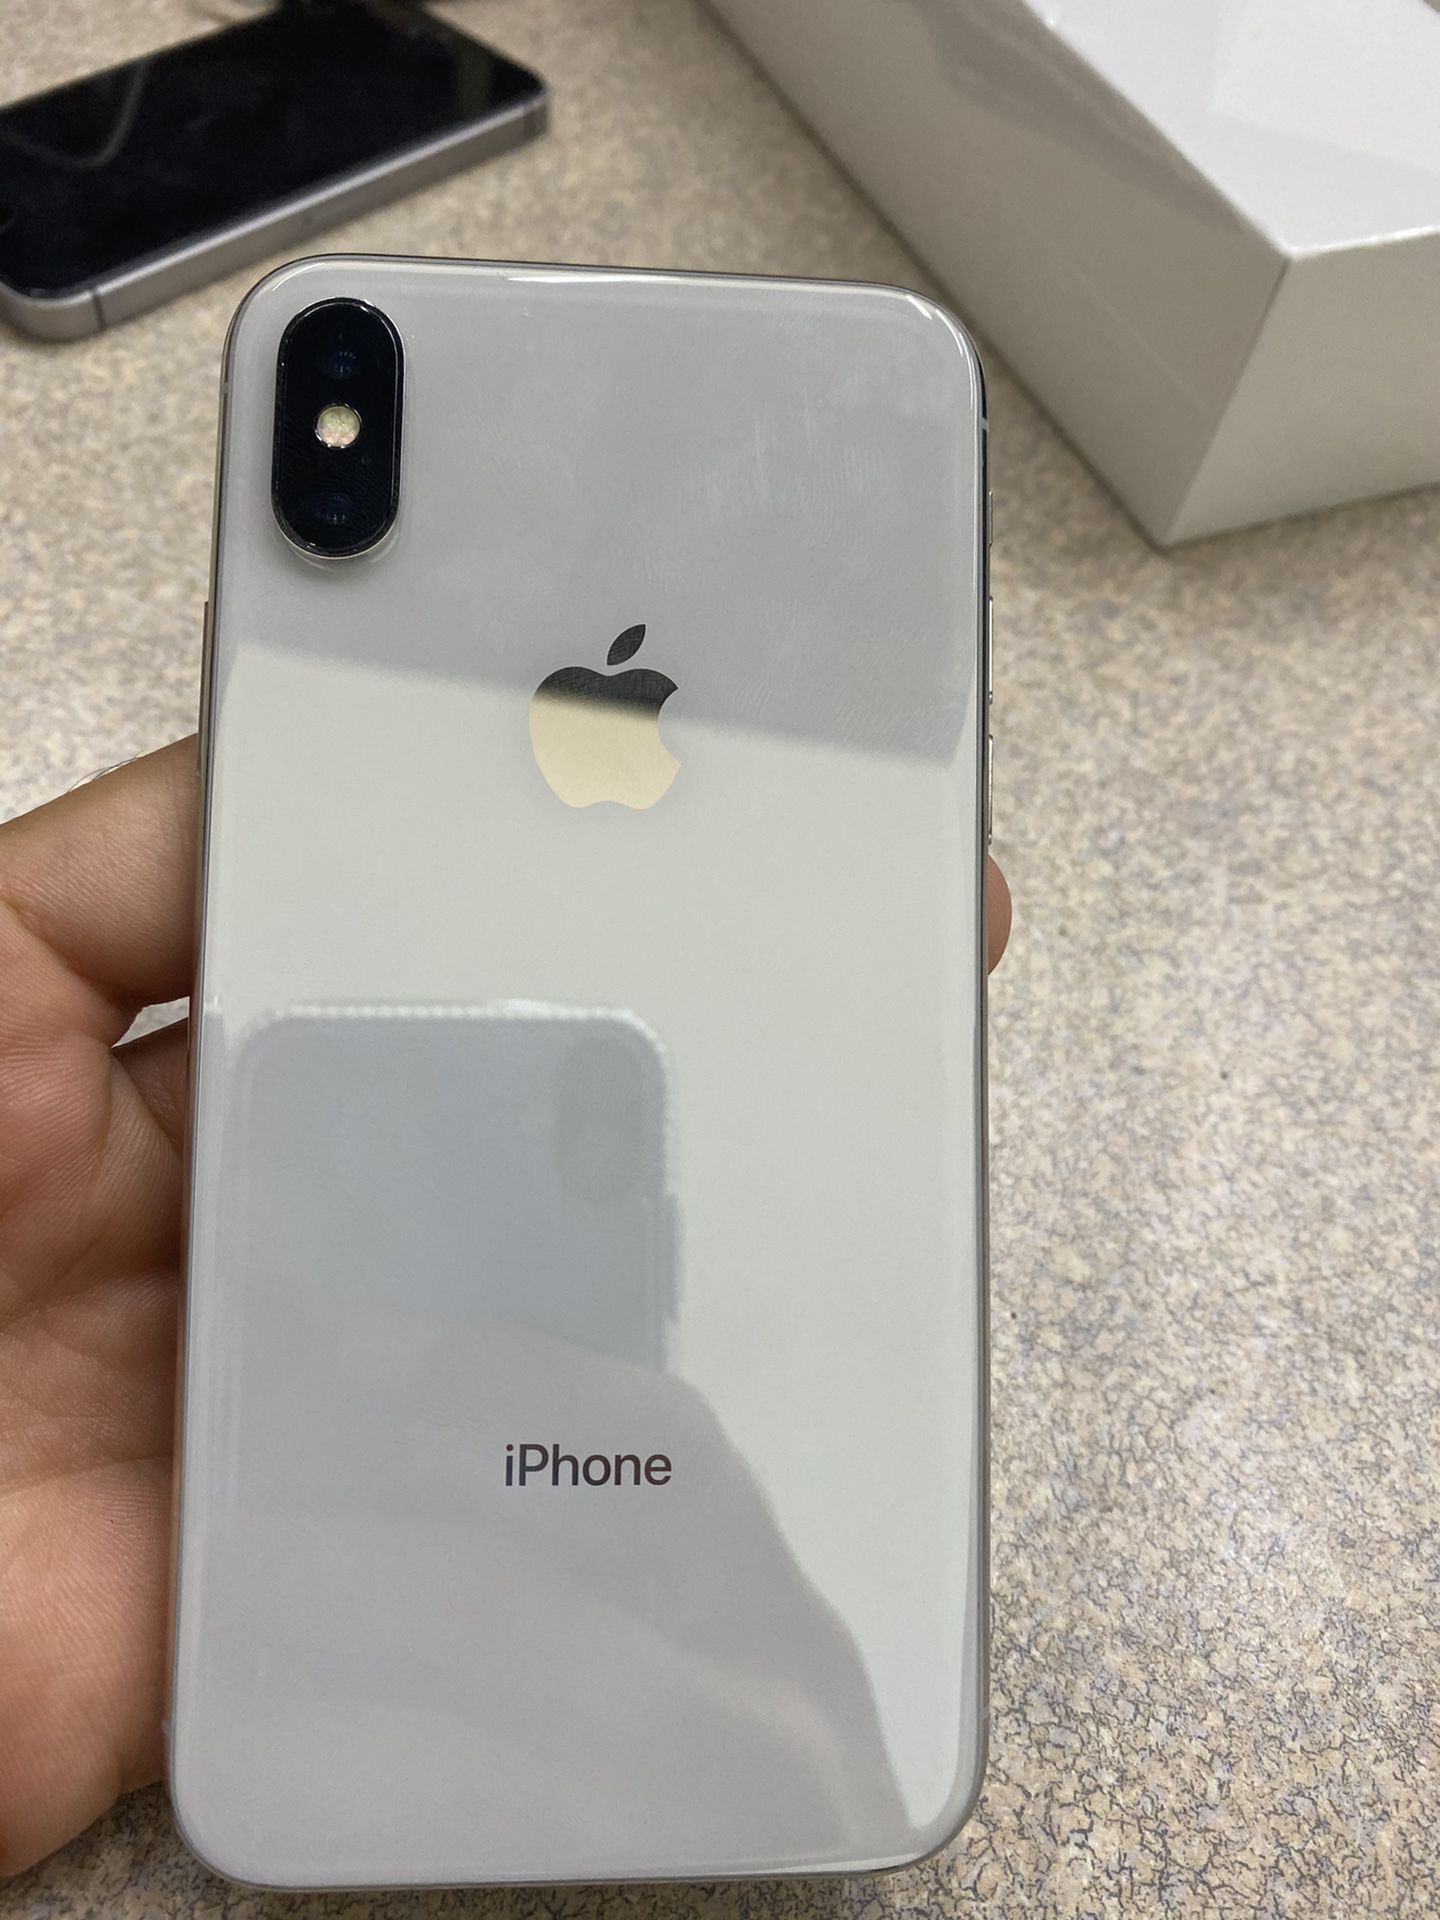 iPhone X 64Gb At&t and cricket excellent condition ready for activation